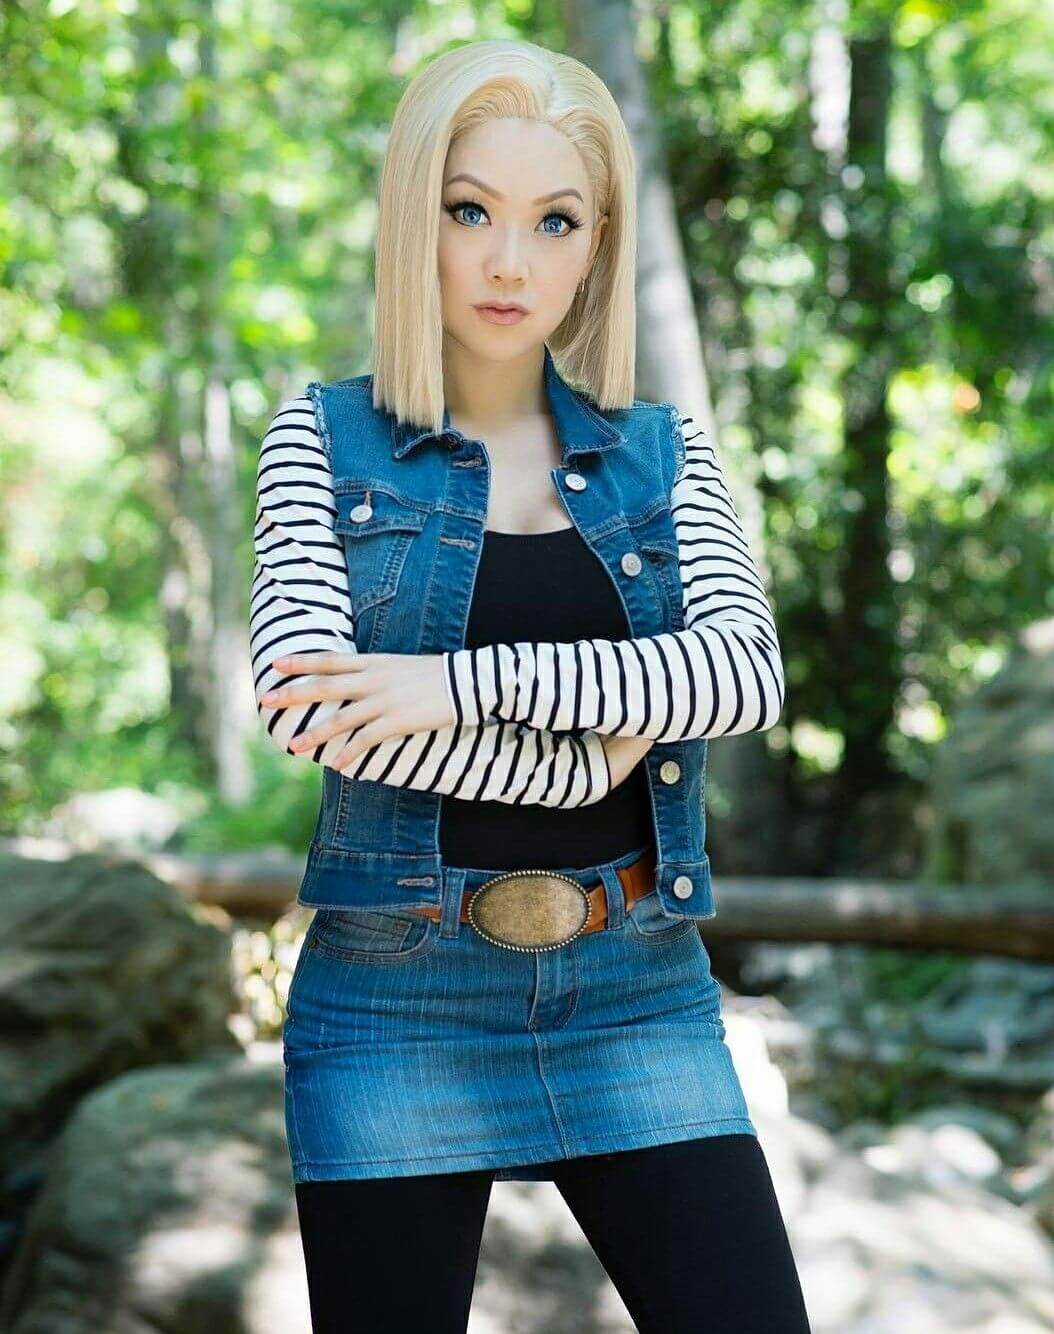 49 Android 18 Nude Pictures Which Prove Beauty Beyond Recognition 86